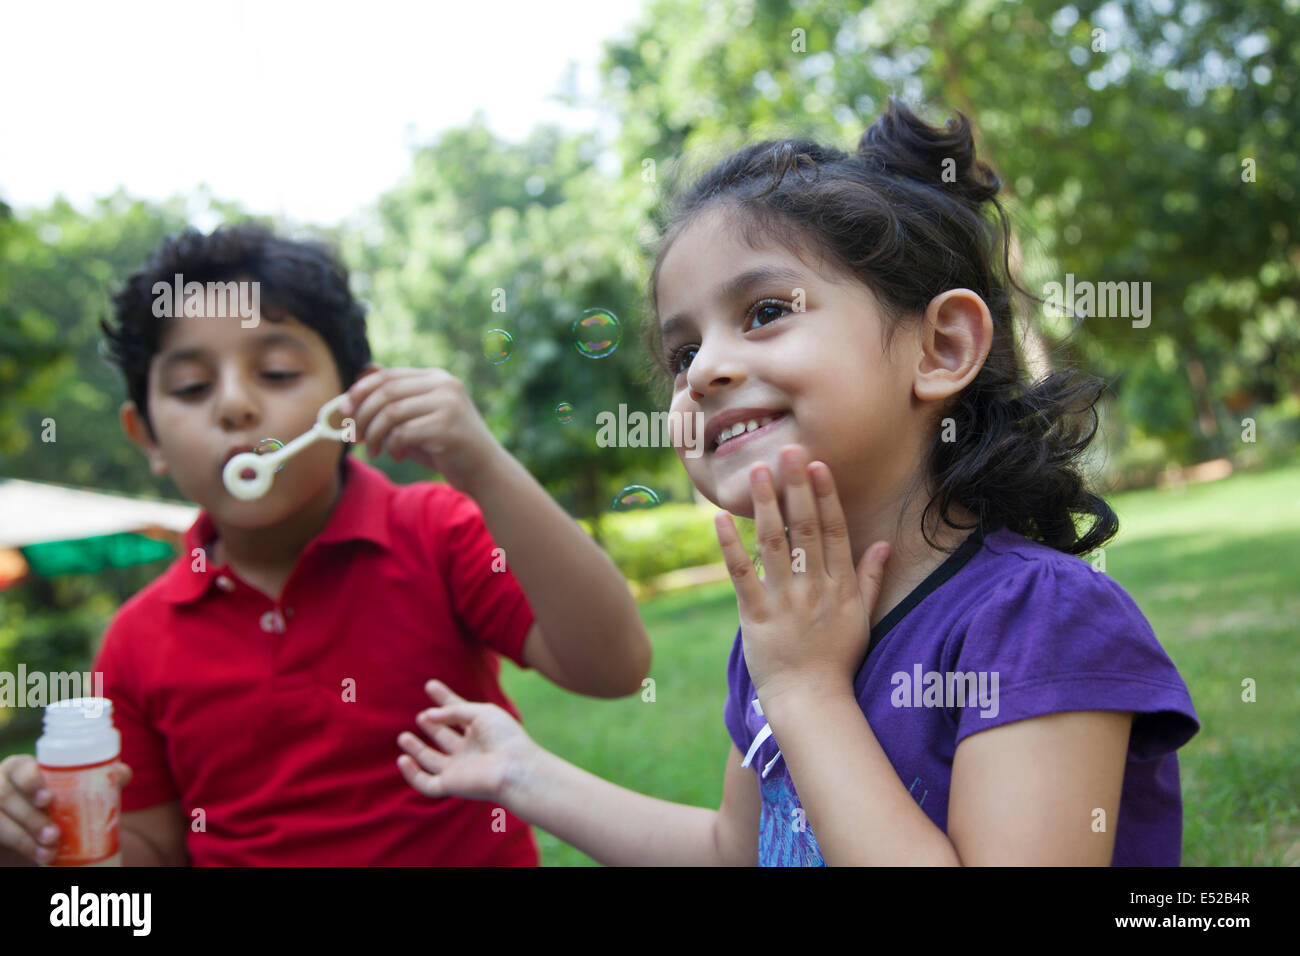 Boy and girl in park Stock Photo